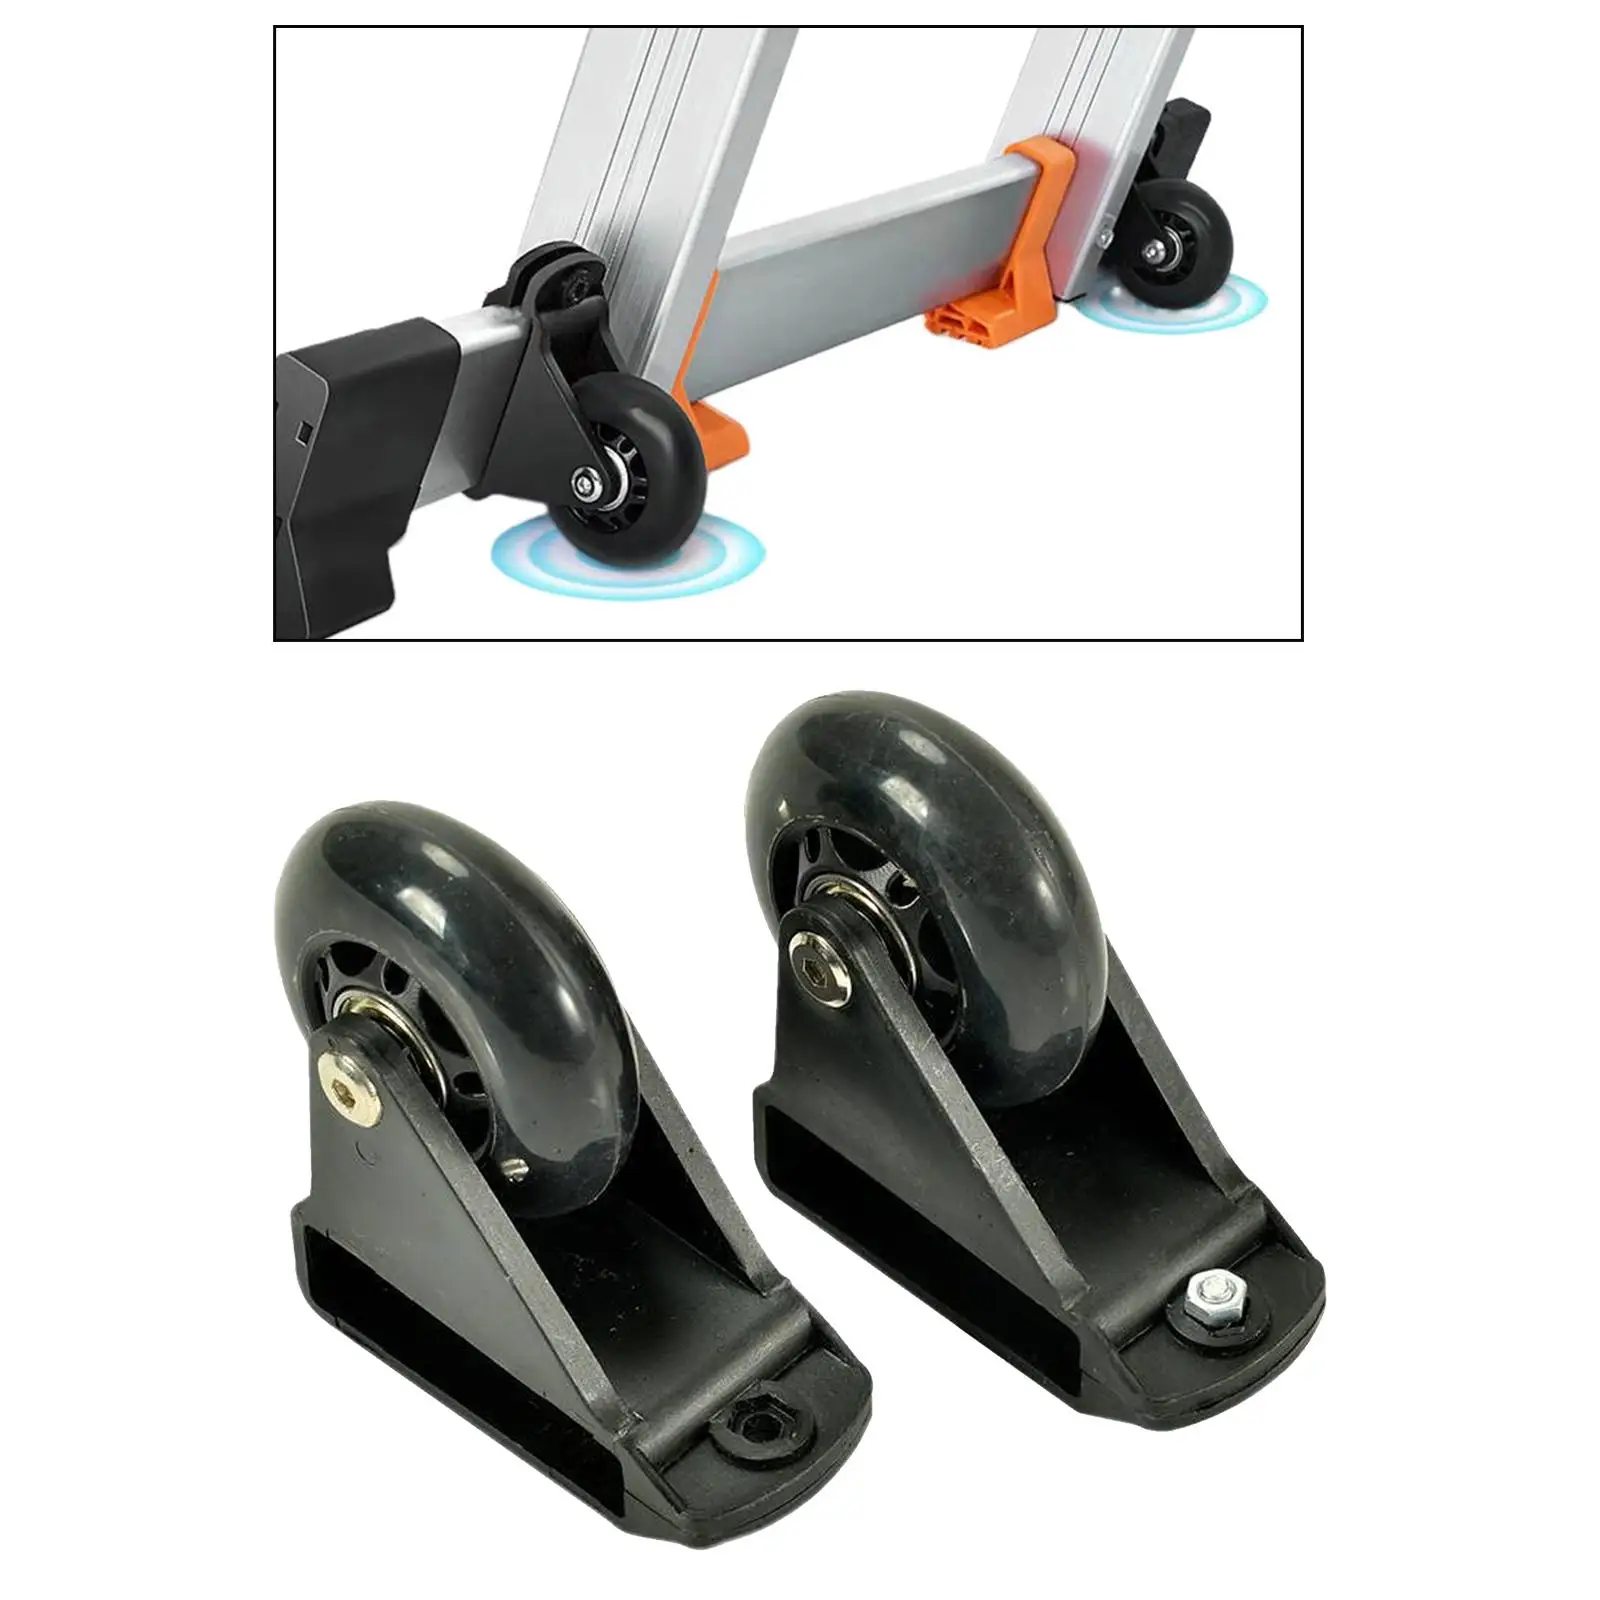 2 Pieces Ladder Leveling Casters Portable Folding Ladder Collapsible Ladder Cart Accessories for Equipment Machine Workbench